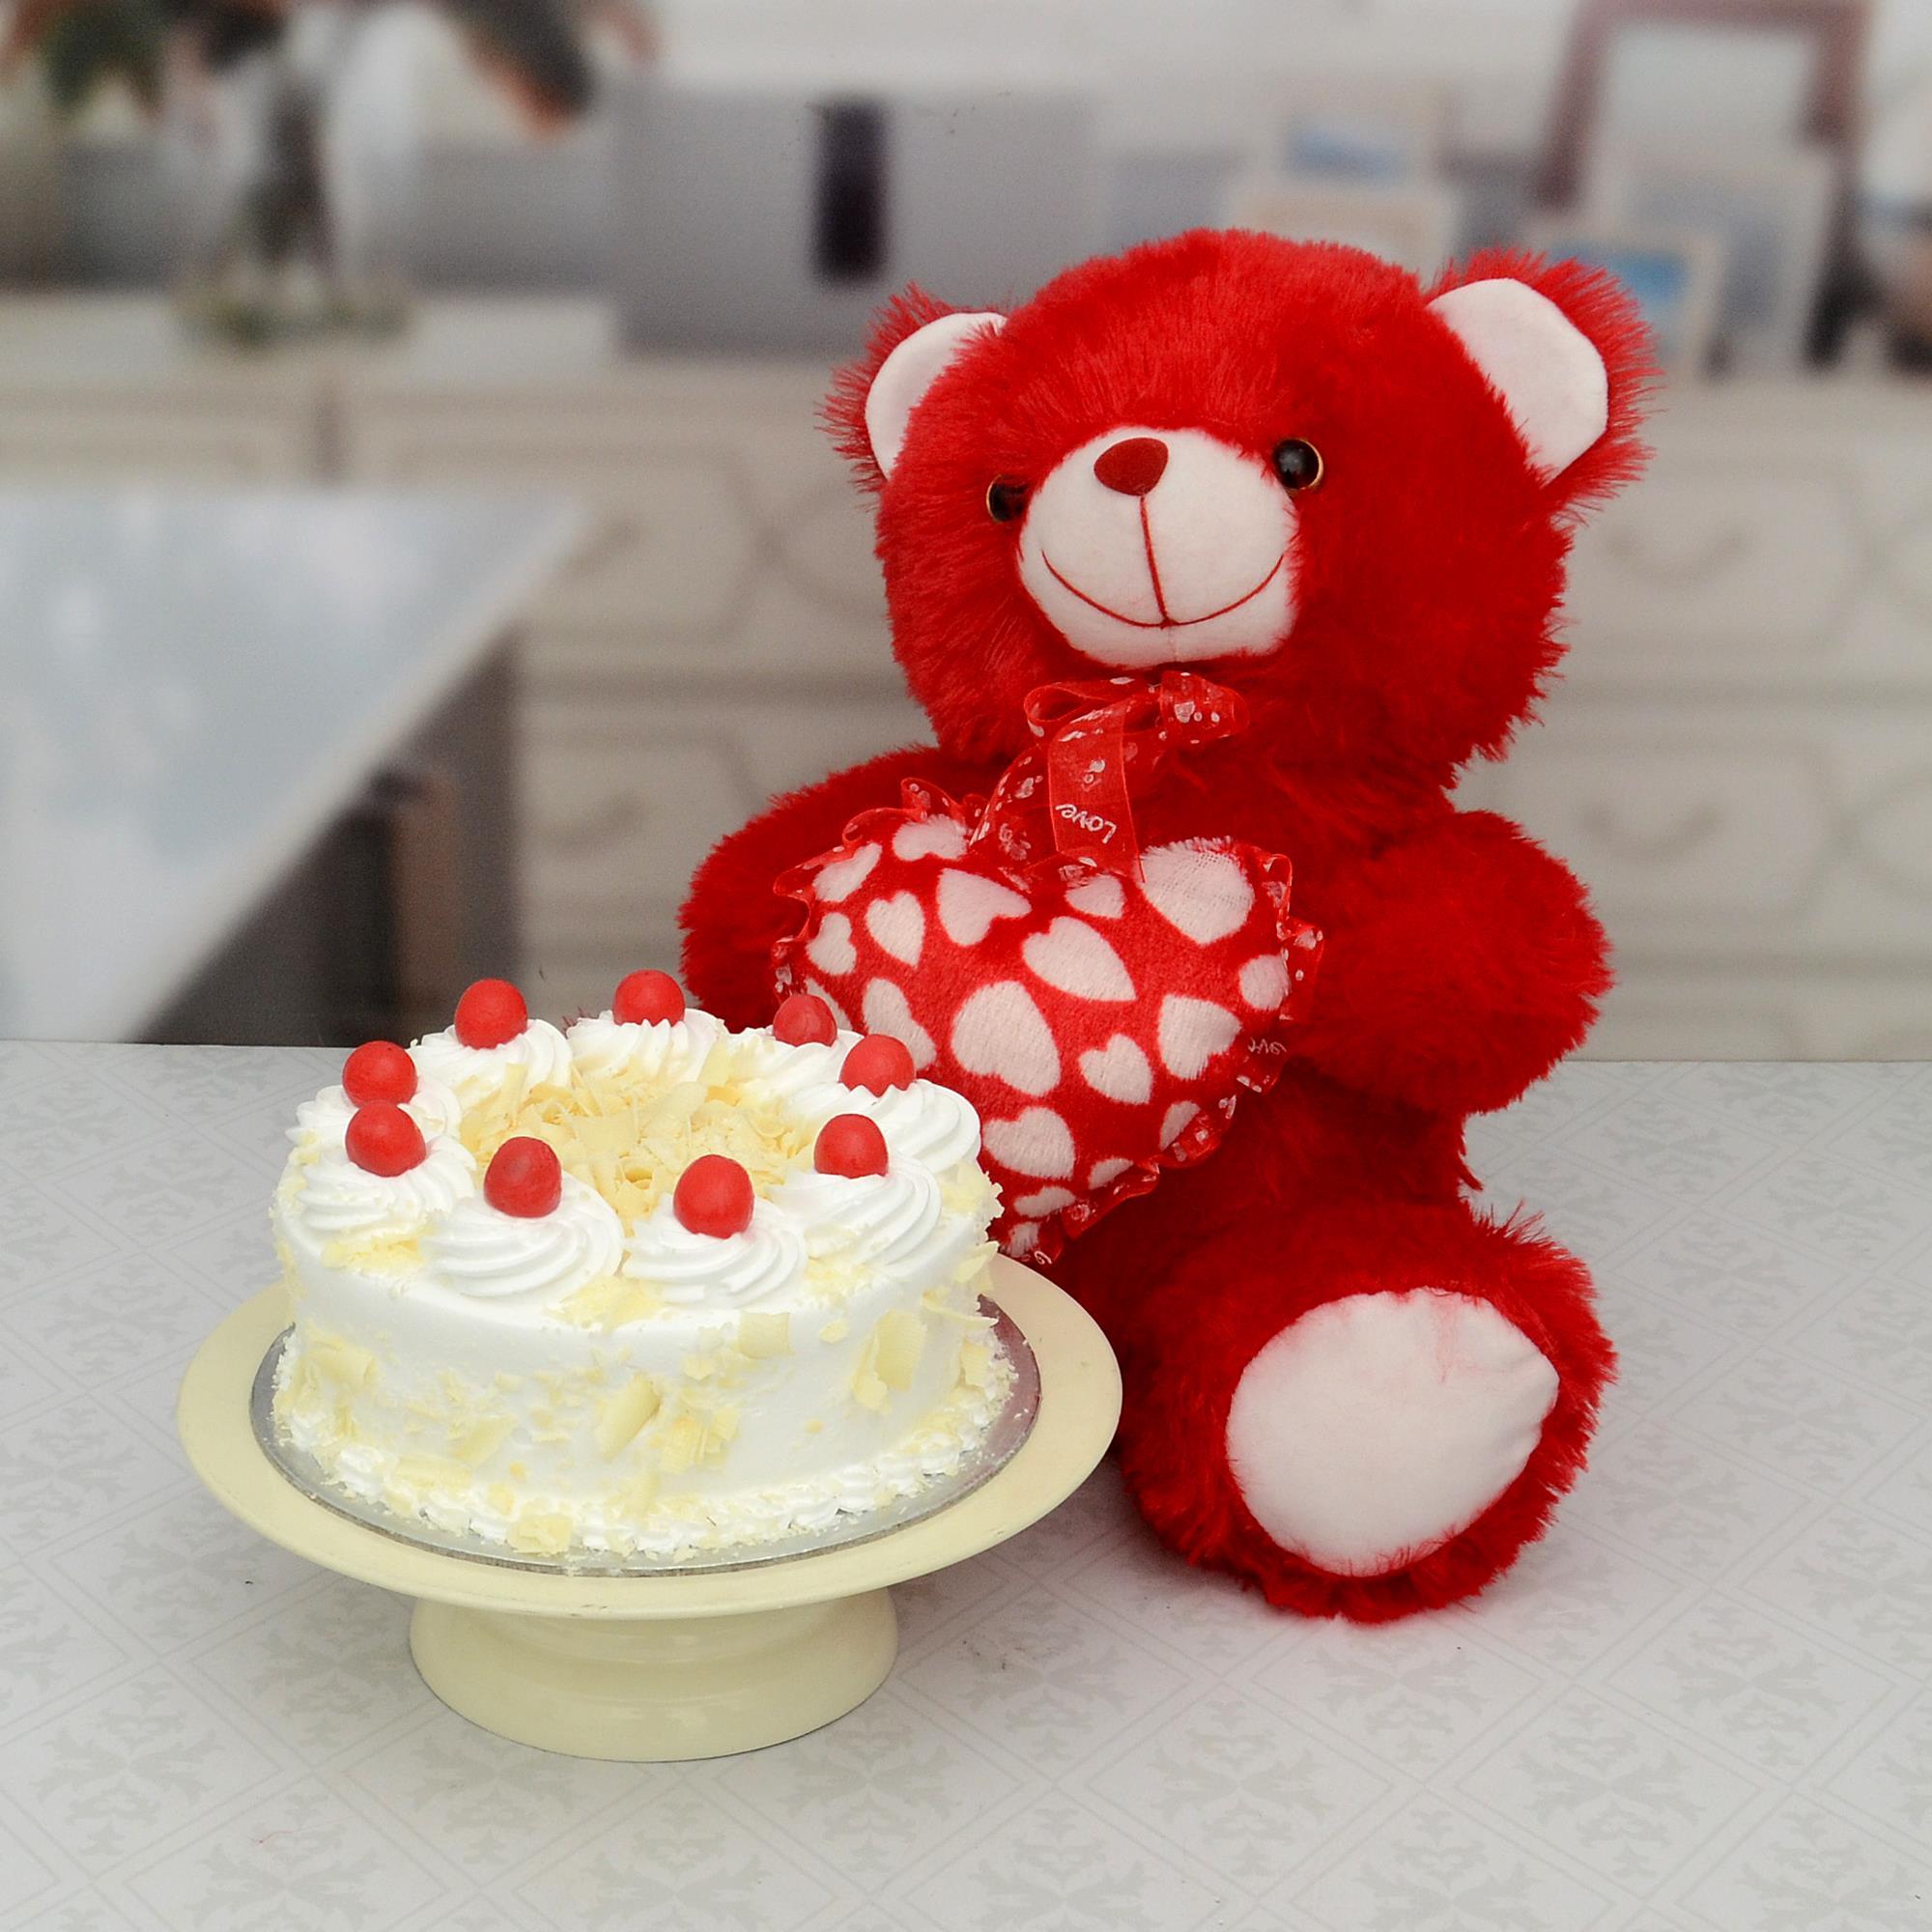 White Forest Cake and Cute Teddy